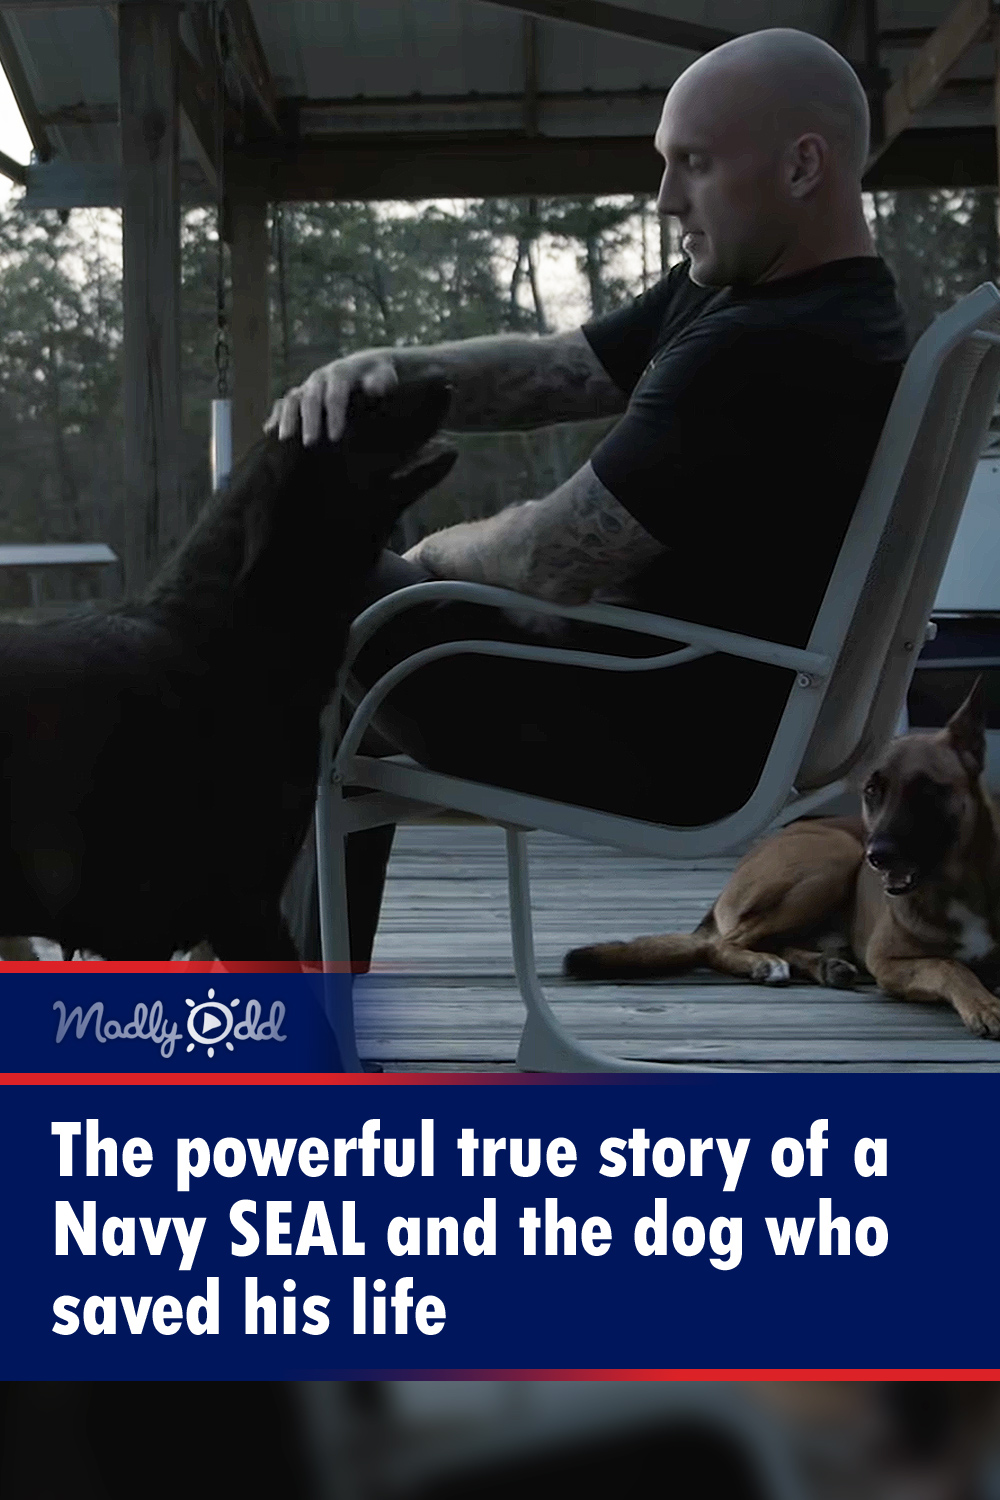 The powerful true story of a Navy SEAL and the dog who saved his life